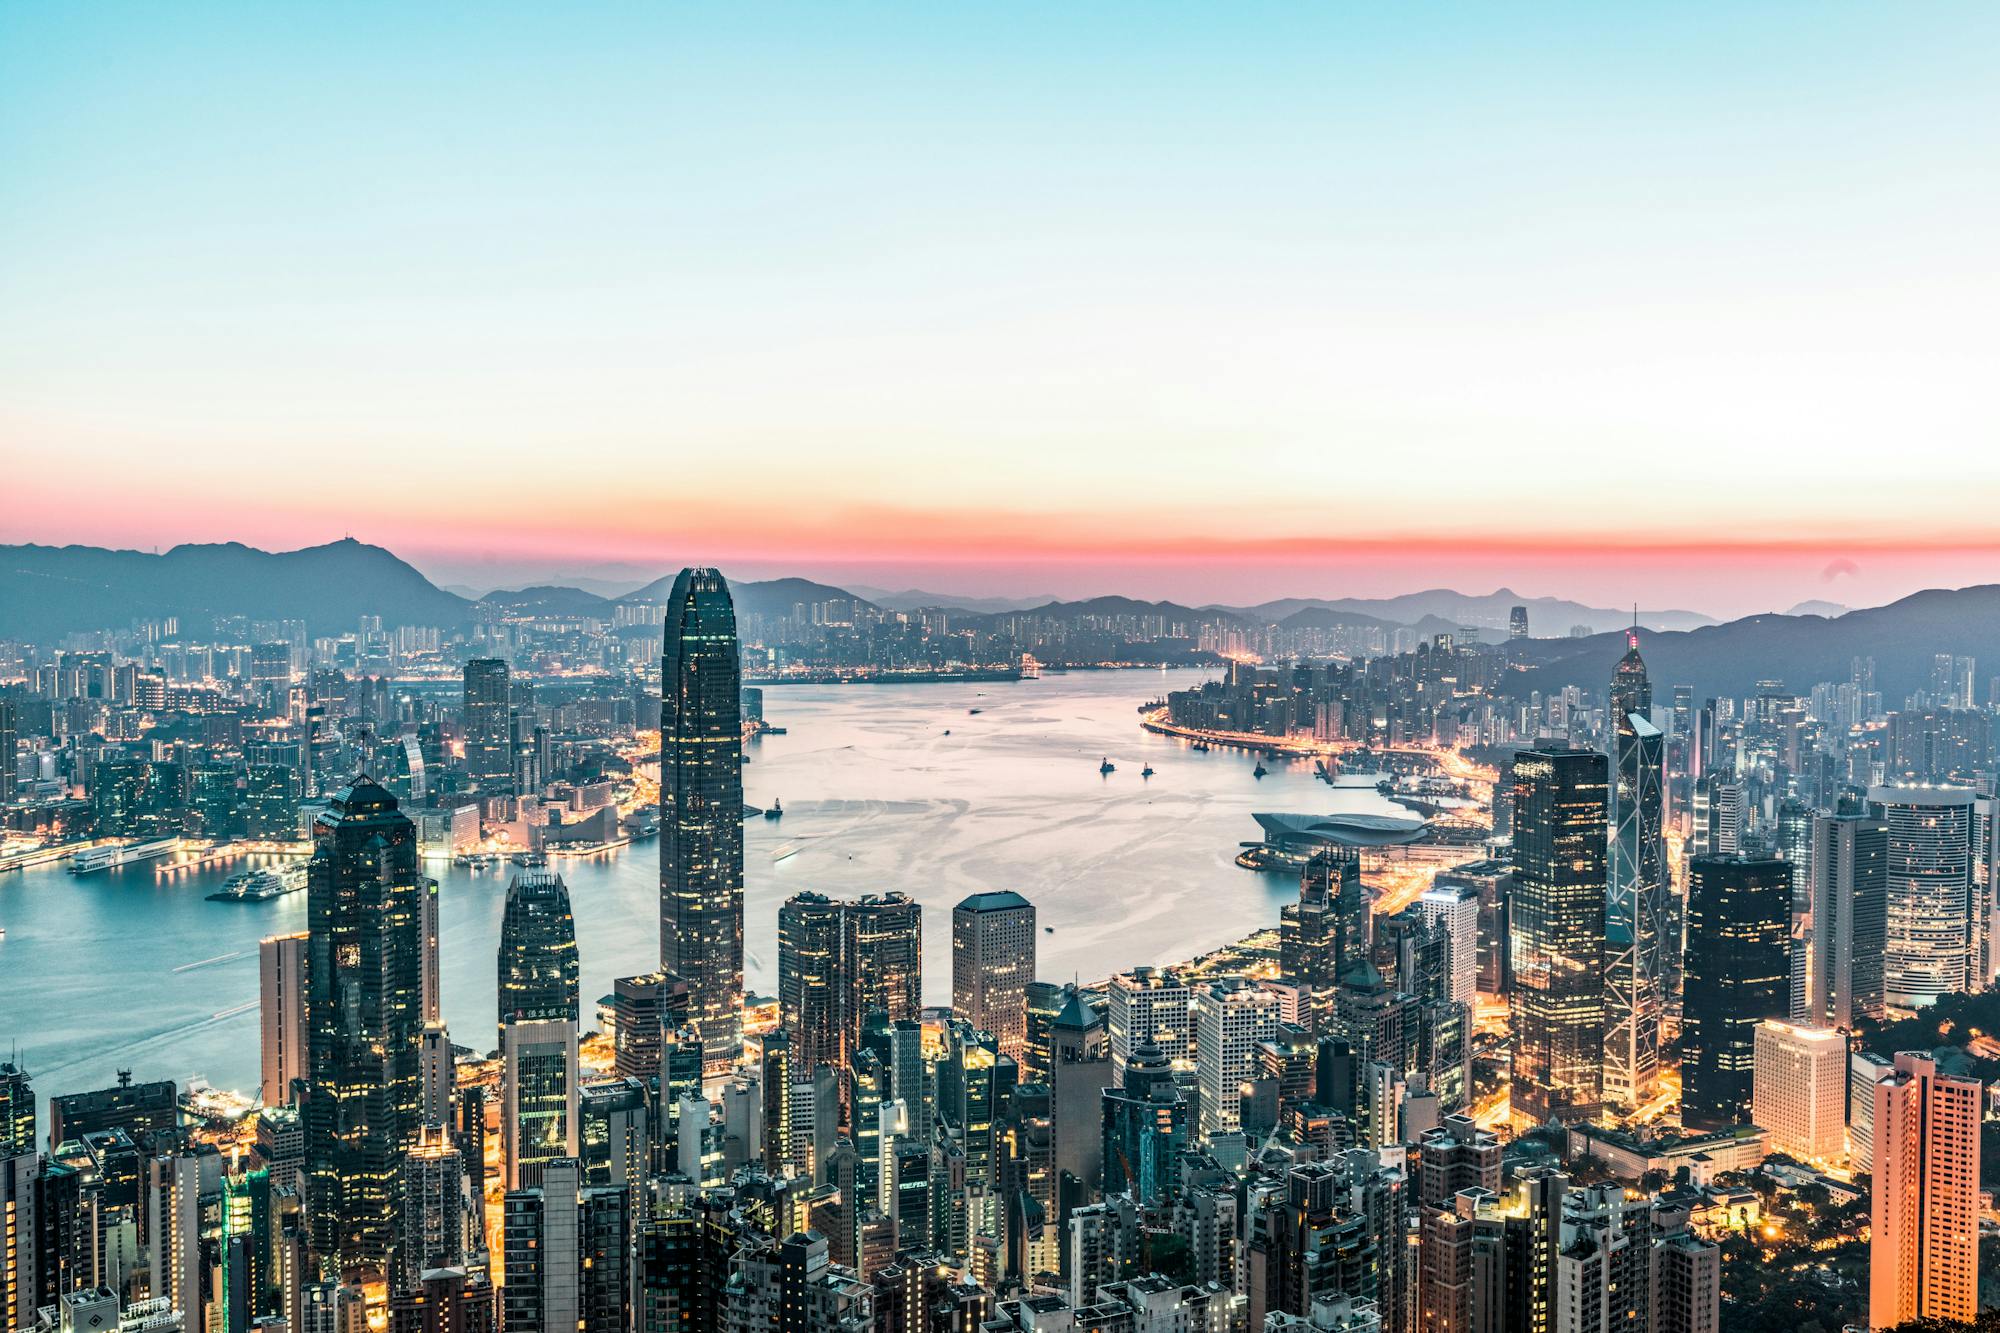 British Luxury Summit Four reasons why Hong Kong matters to luxury brands 